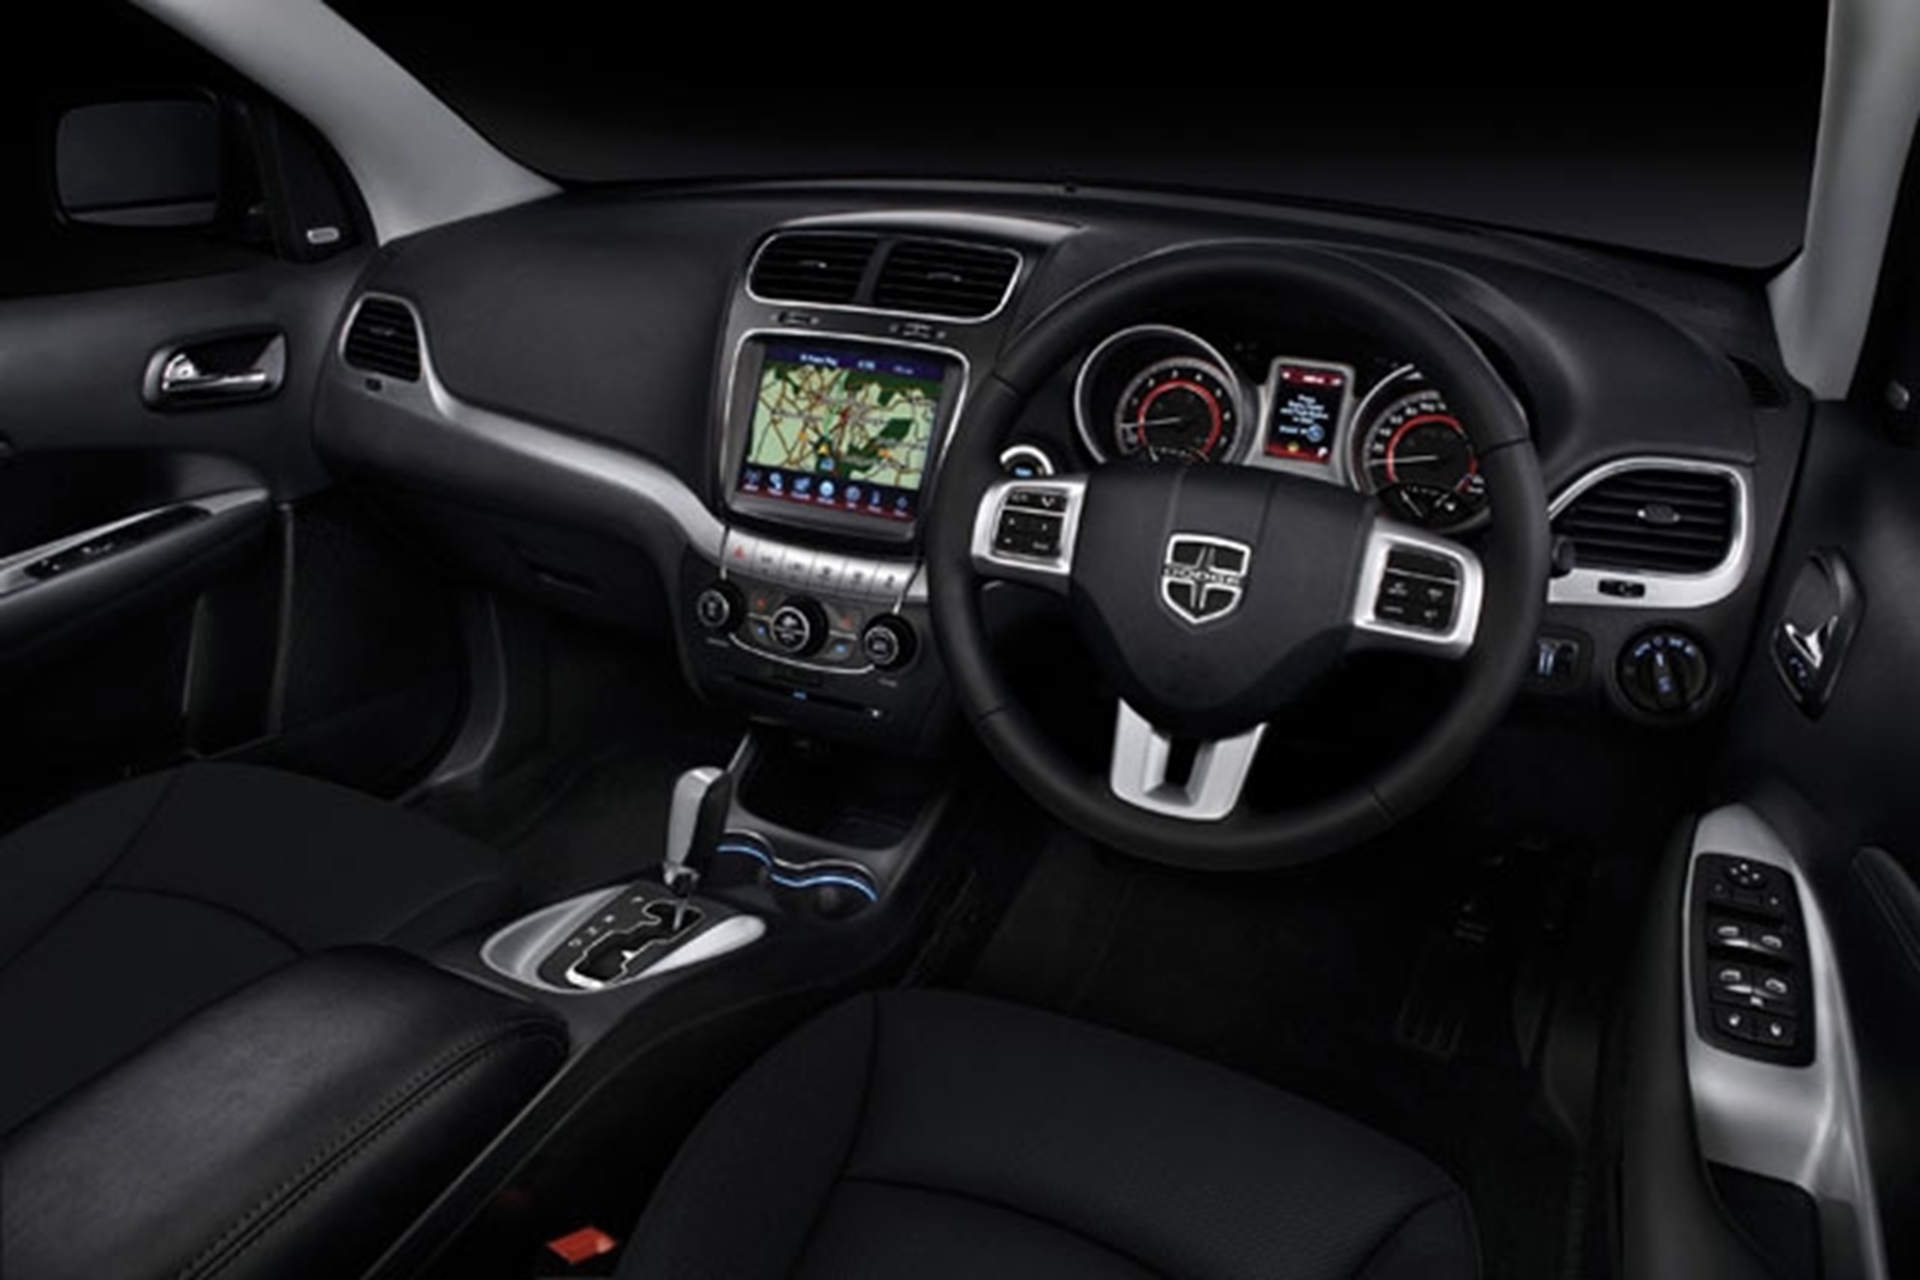 2012 Dodge Journey – Most Versatile and Powerful in its Class